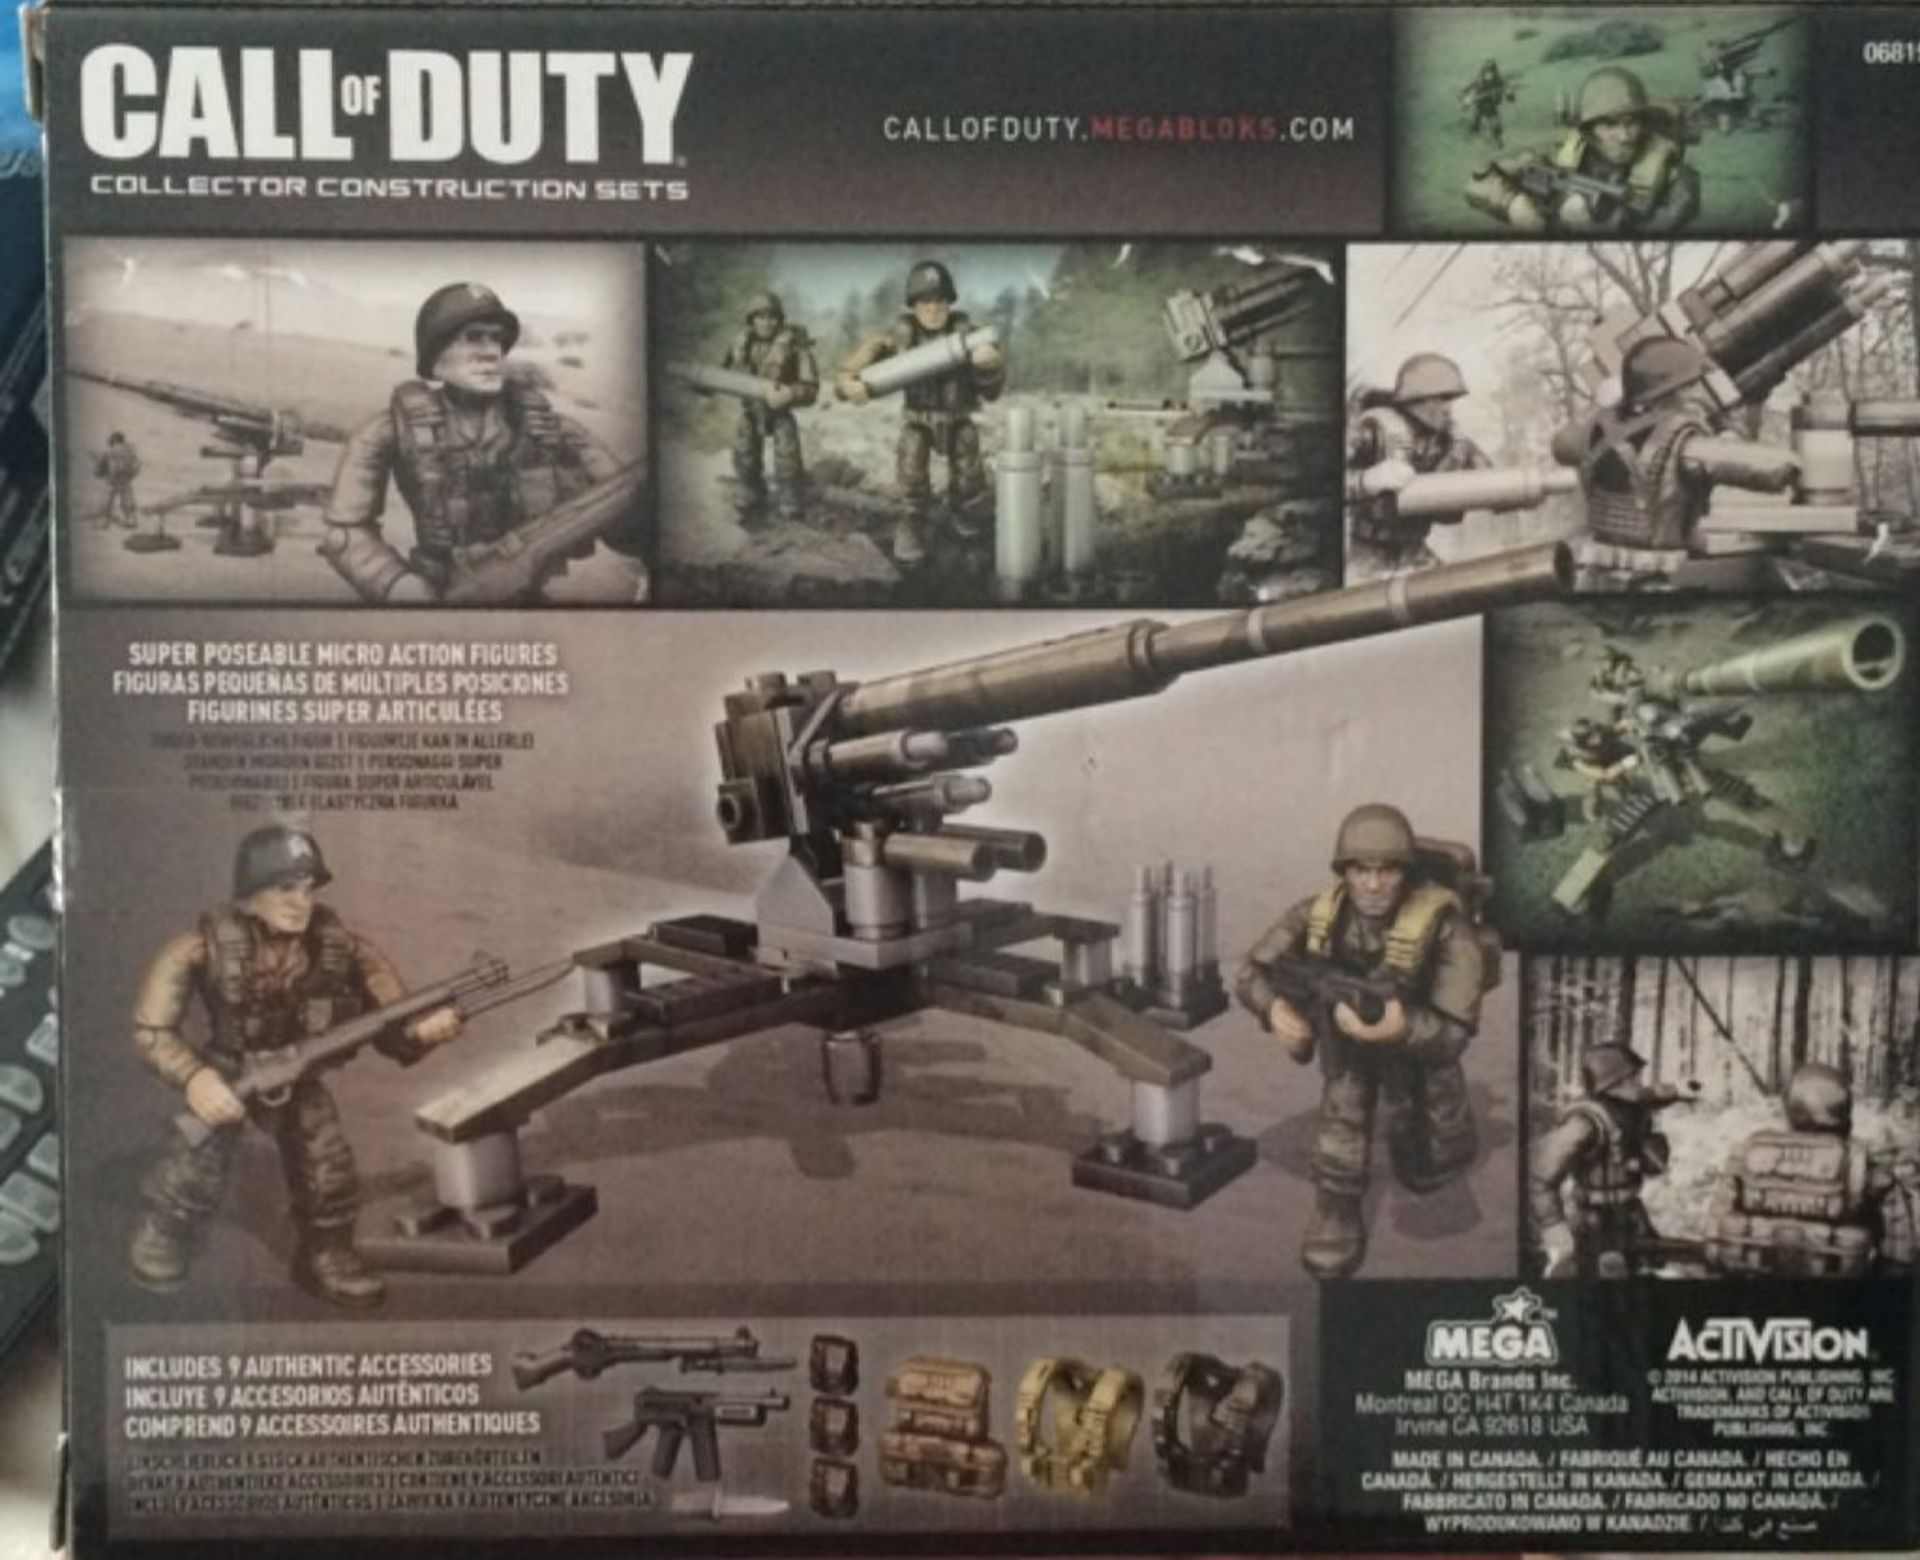 V *TRADE QTY* Brand New Call Of Duty Mega Blocks Collector Series Attack Turrent eBay Price £16.99 X - Image 2 of 2